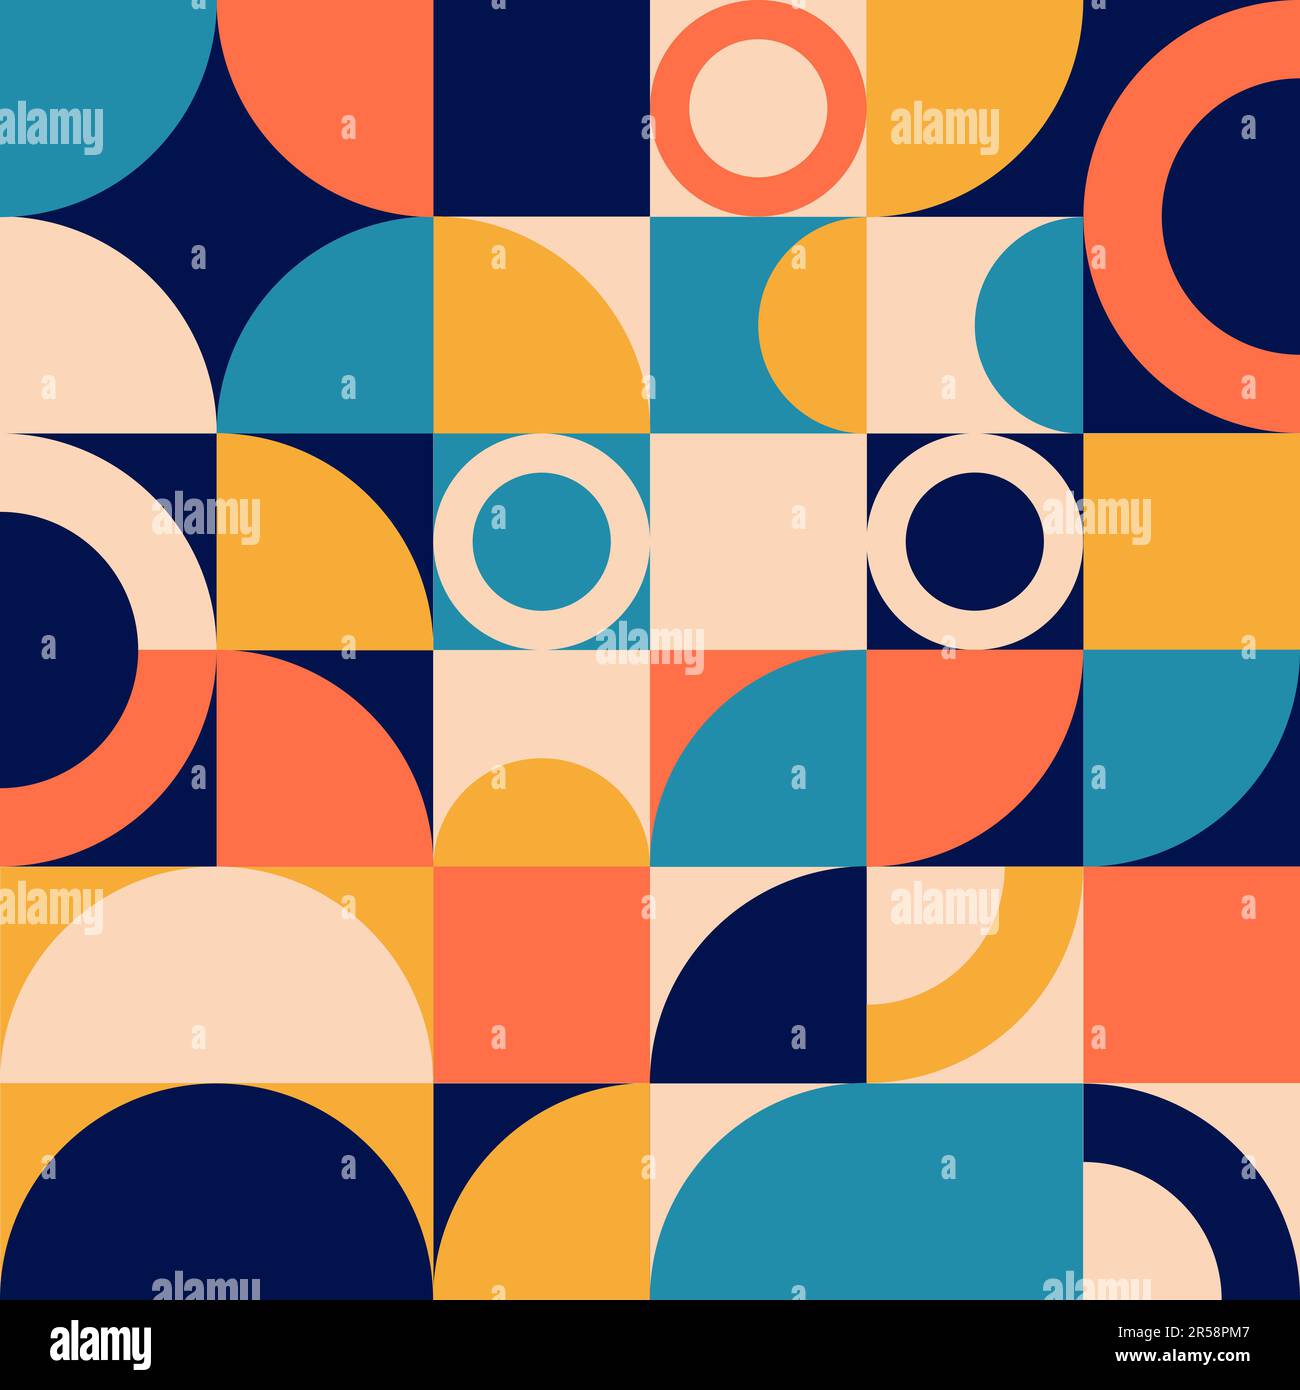 Bauhaus Colorful Design For Pattern. Vector Illustration  Stock Vector